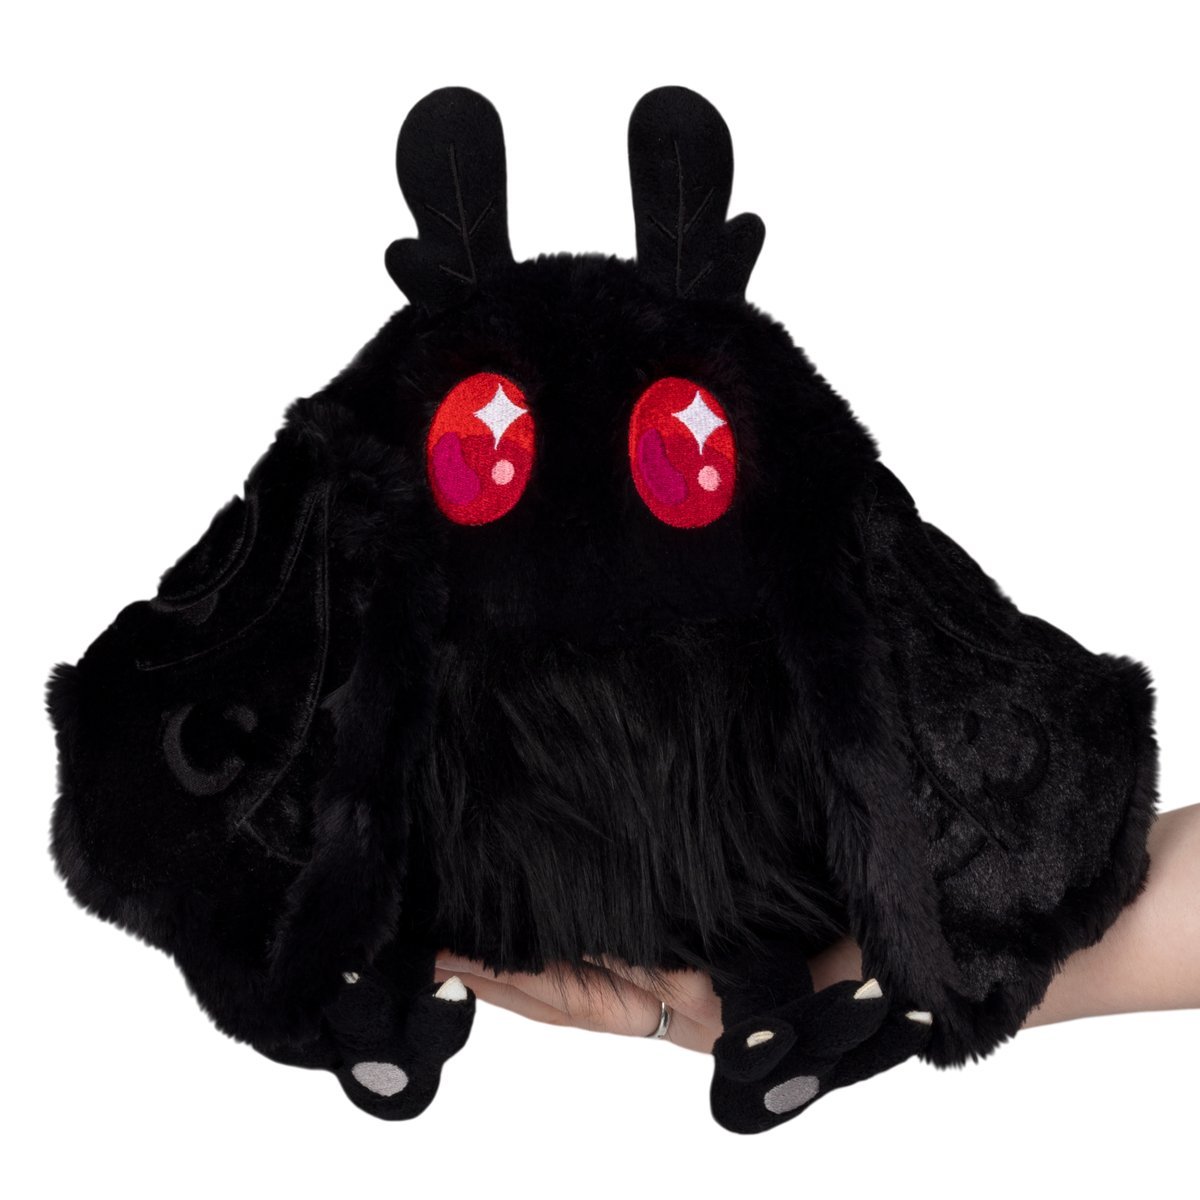 「Squishables has a new Mothman, with glit」|Isa // Lord of Crows, Owner of Blåhajsのイラスト